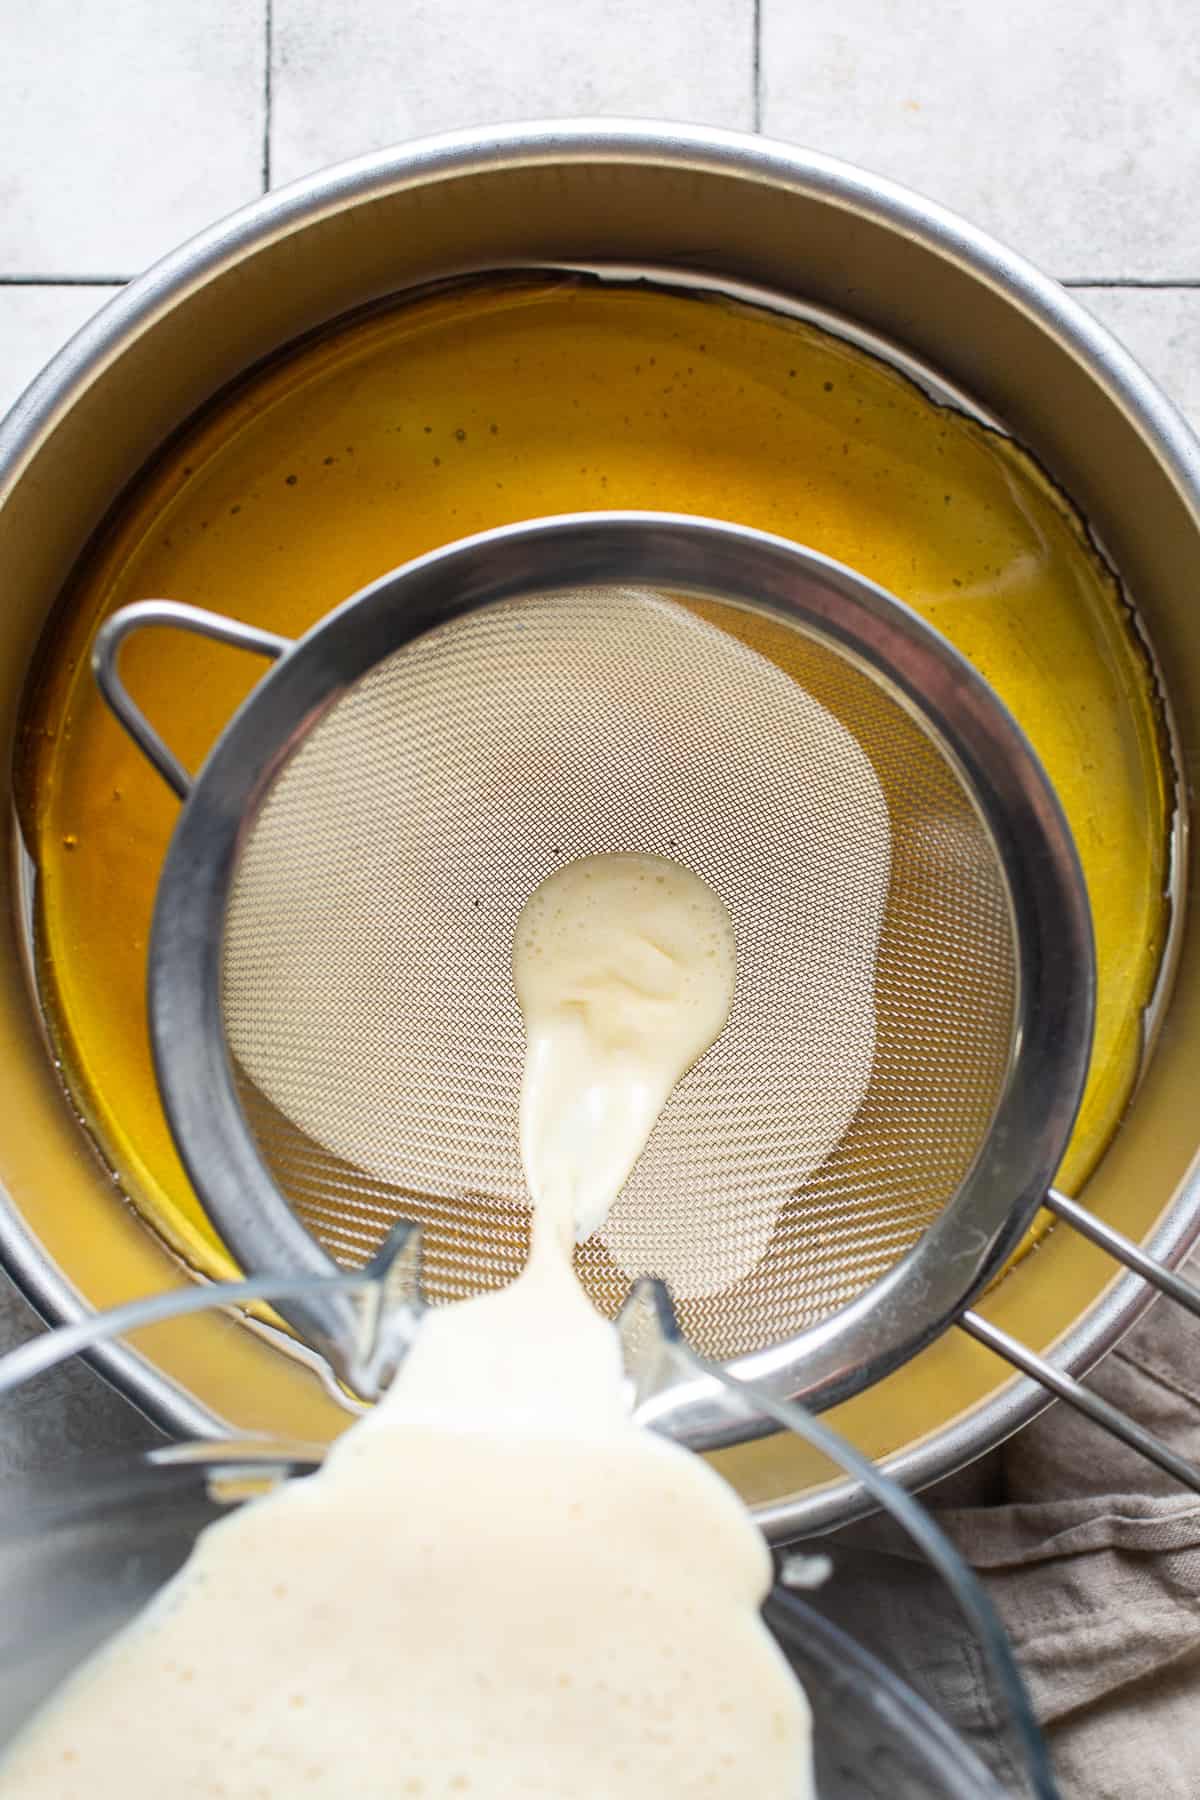 The blended flan de queso mixture being poured through a fine mesh strainer and into a round cake pan.